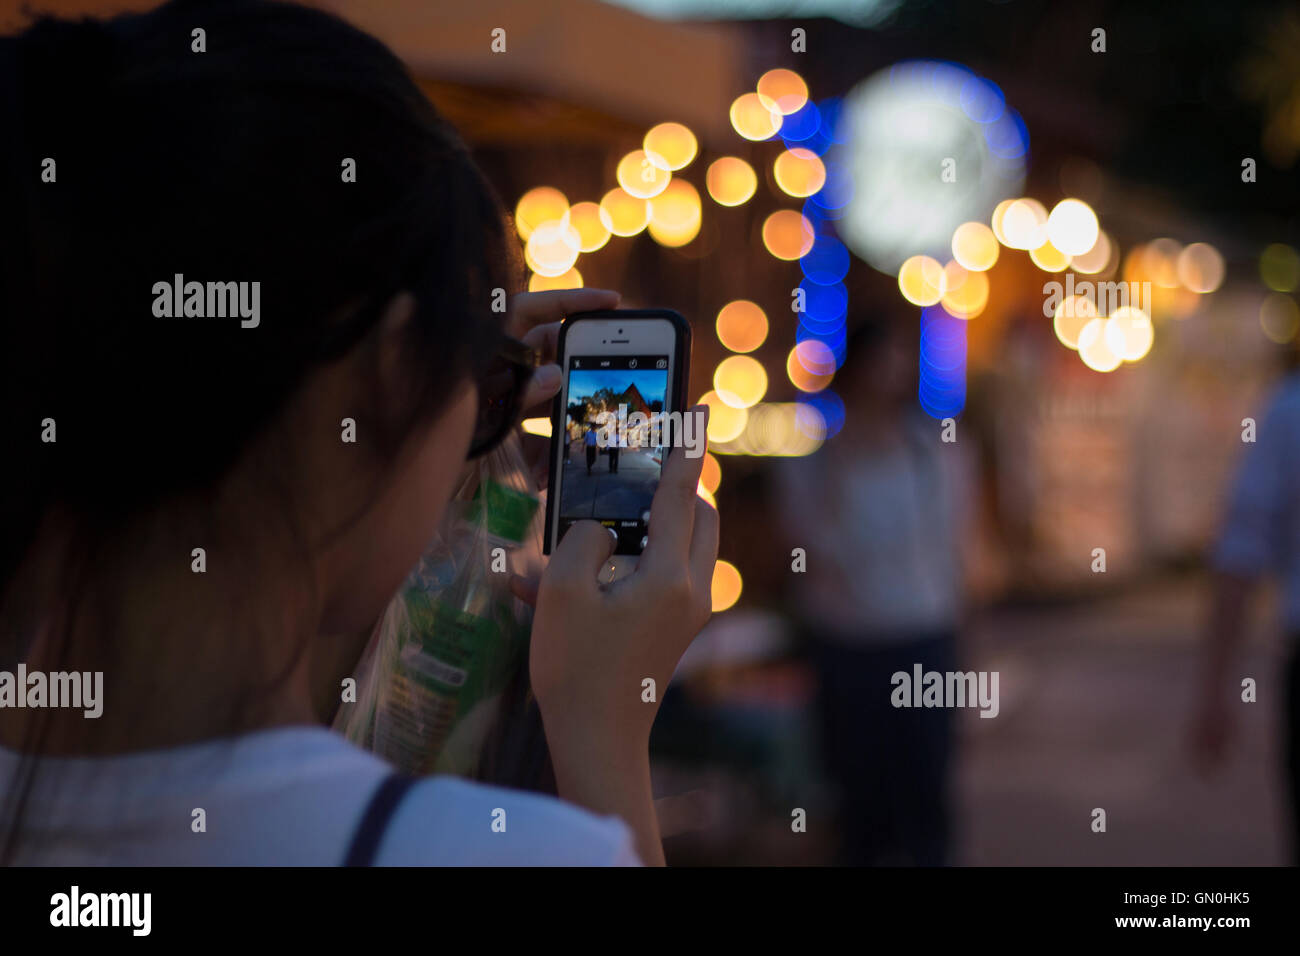 Asian woman taking picture with her cellphone at night Stock Photo